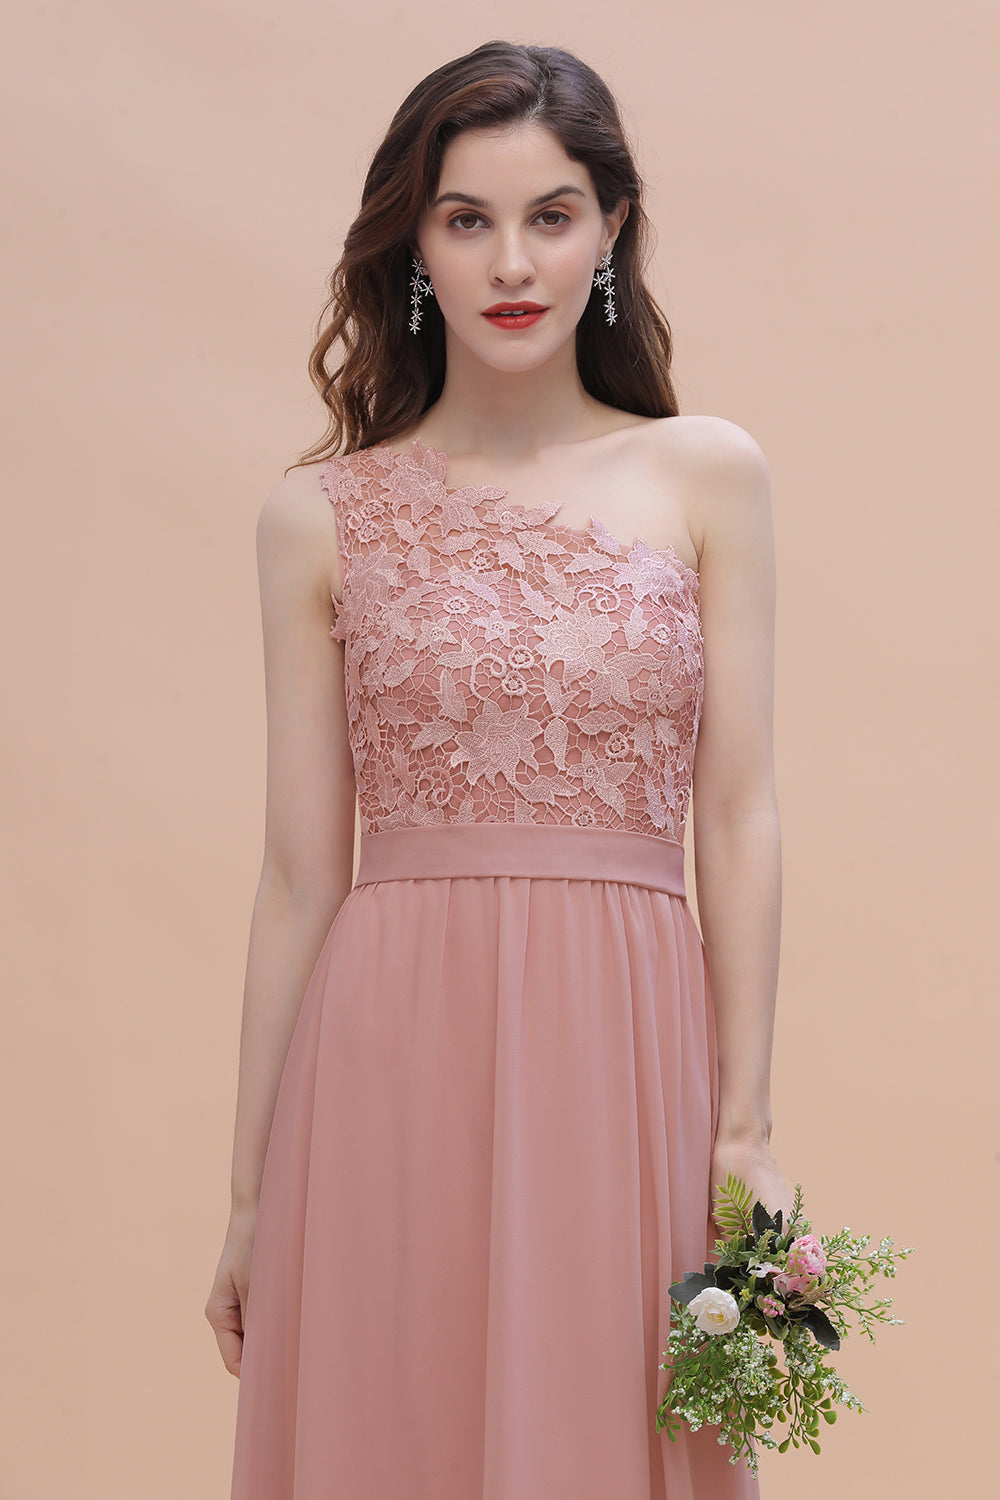 Load image into Gallery viewer, Chic One Shoulder Chiffon Lace Vintage Mauve Bridesmaid Dress On Sale-27dress
